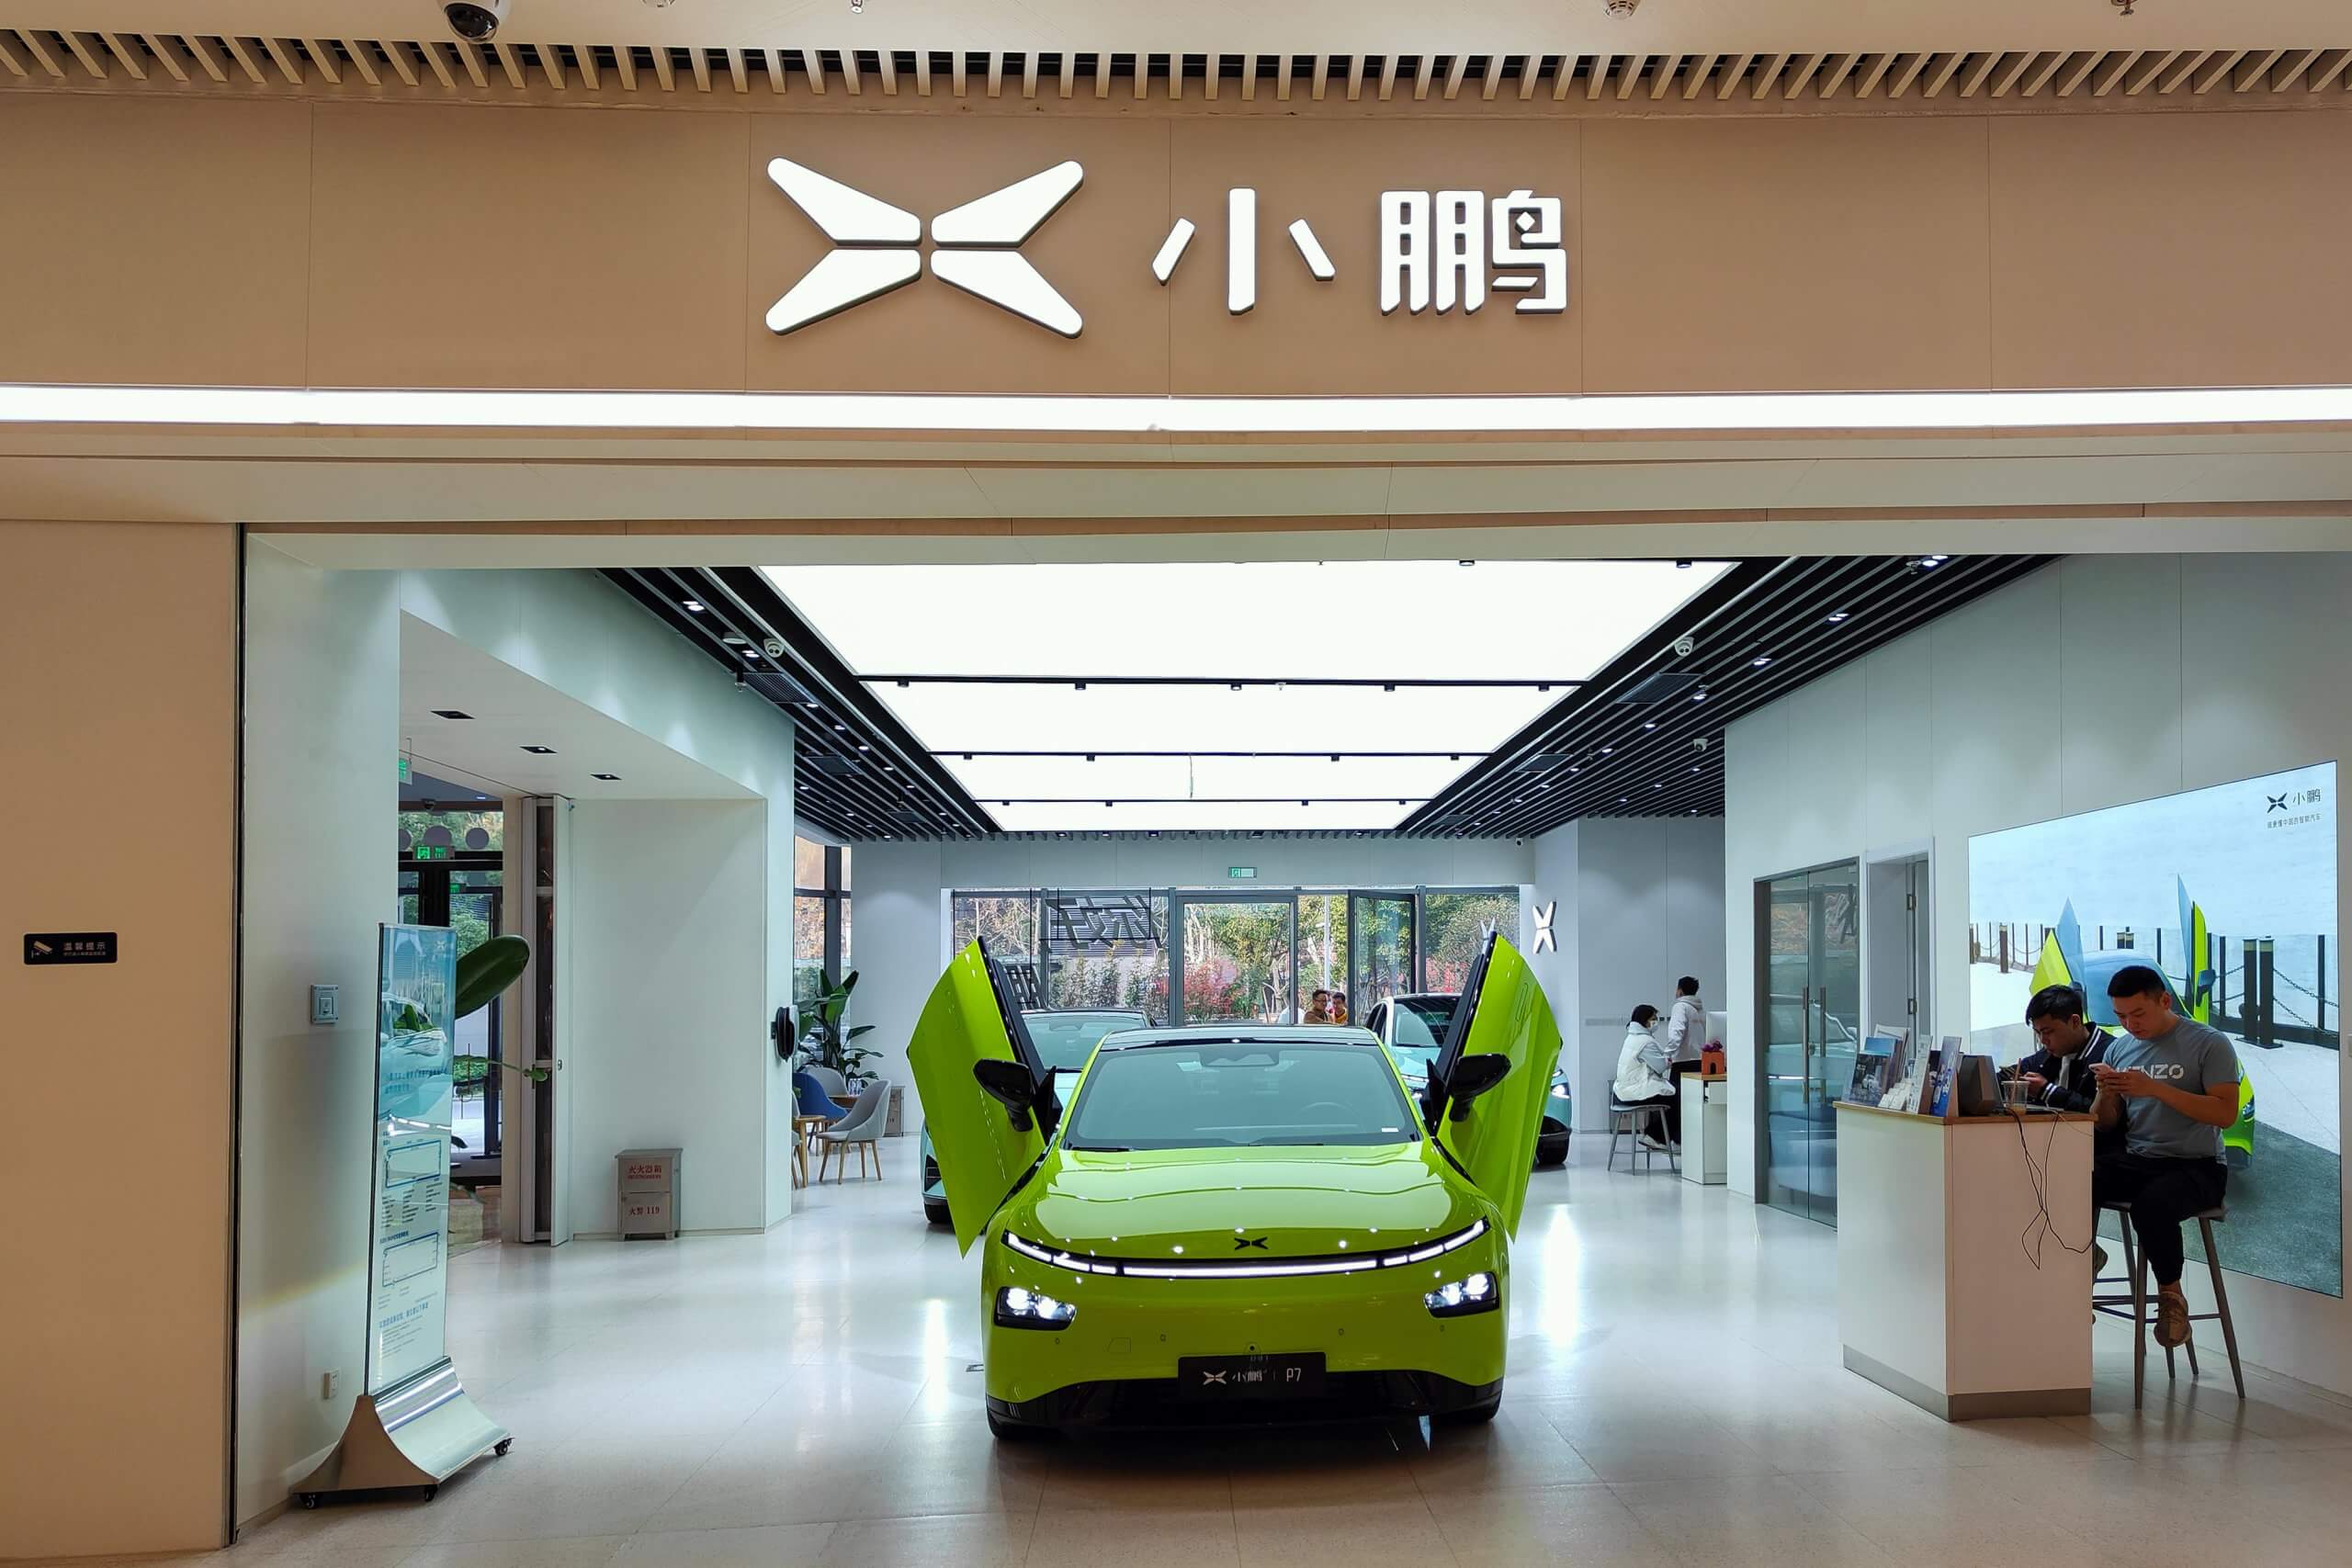 More competition for Tesla as Chinese rival Xpeng bring affordable electric car to Europe